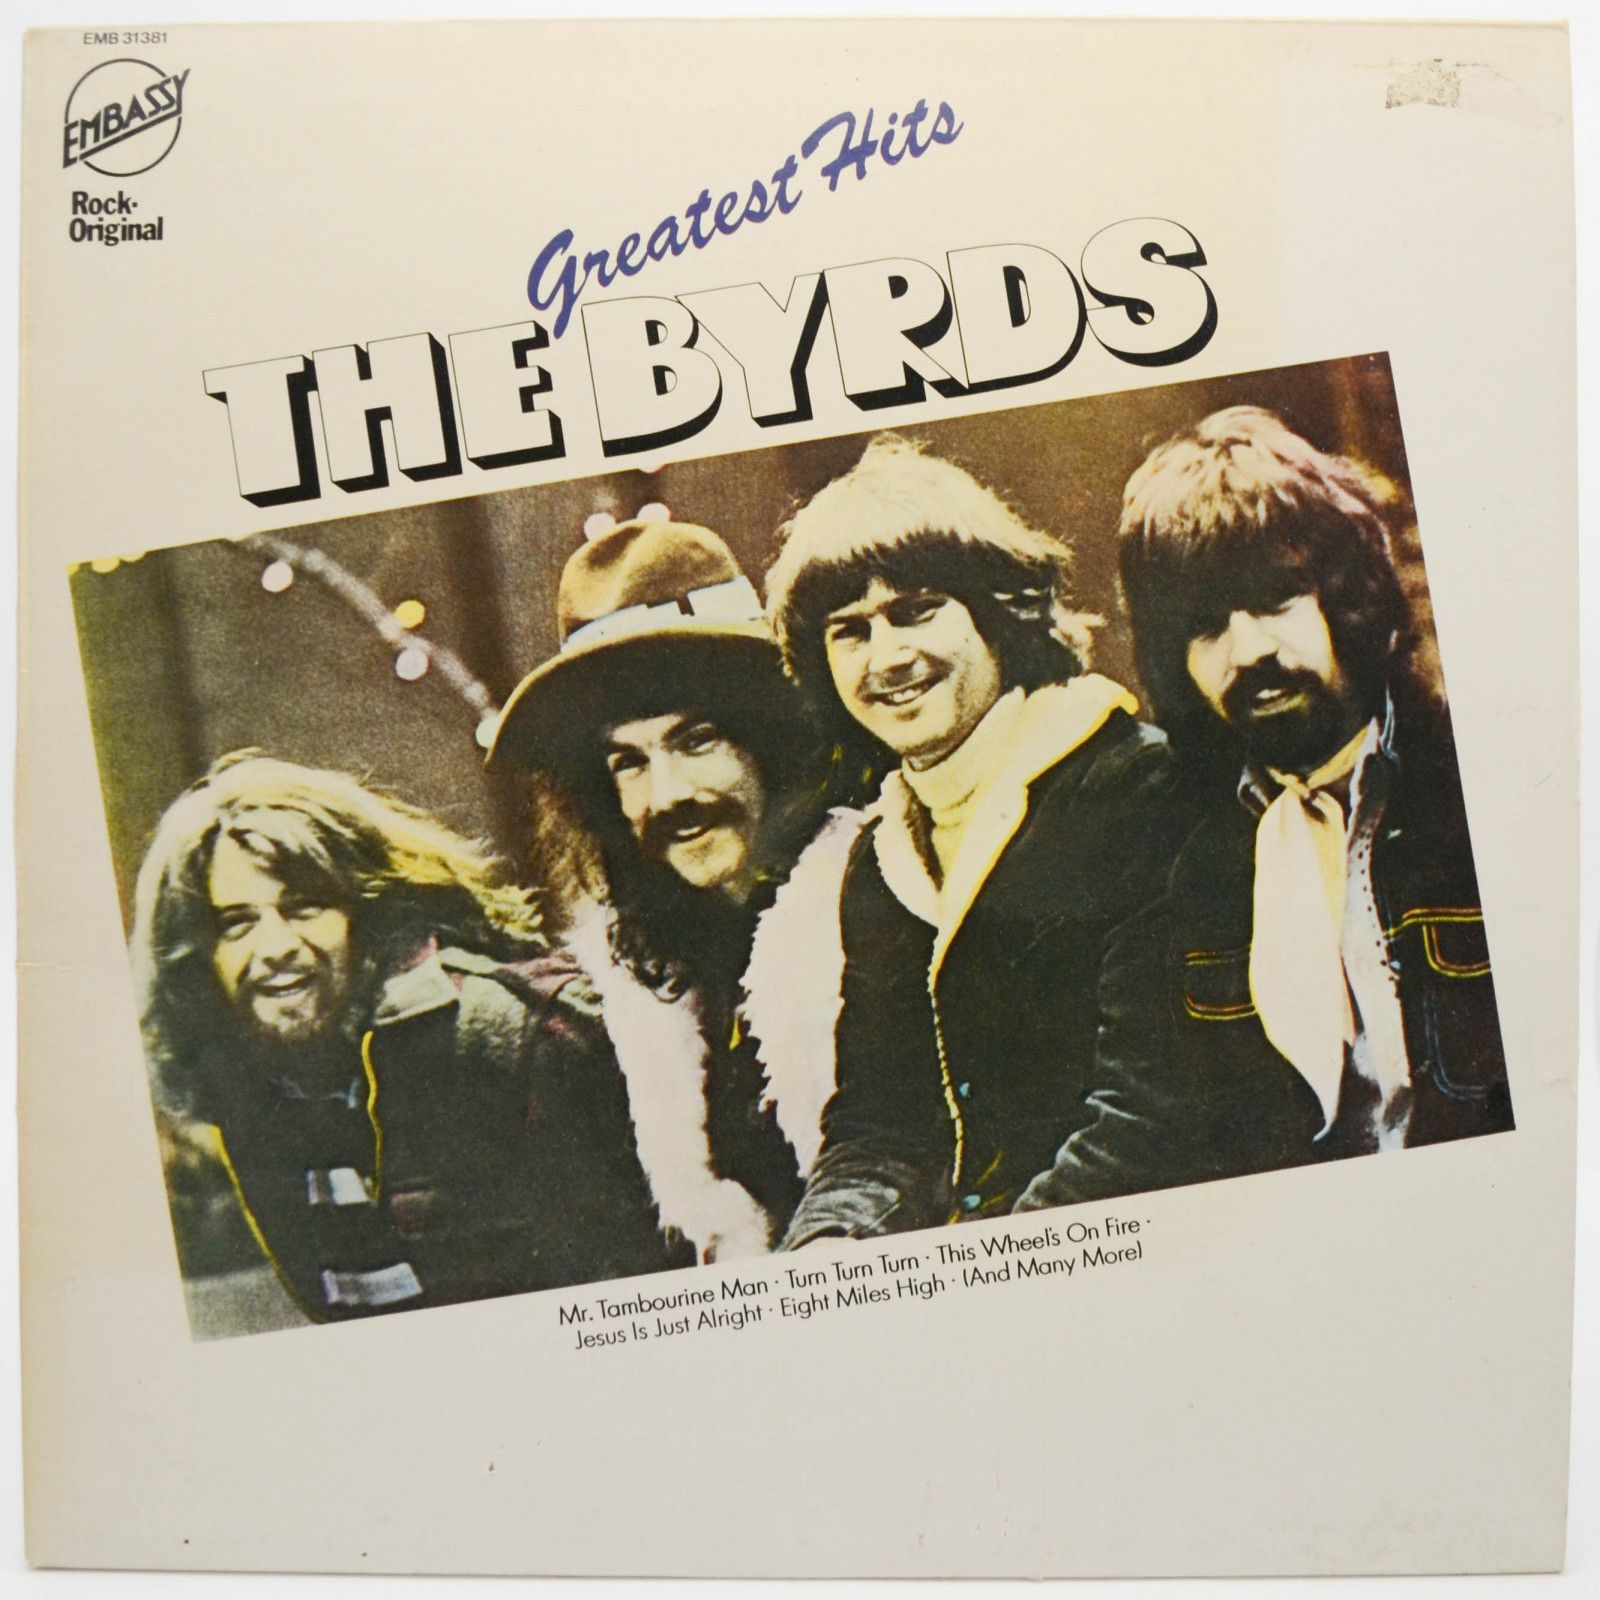 Byrds — Greatest Hits, 1976